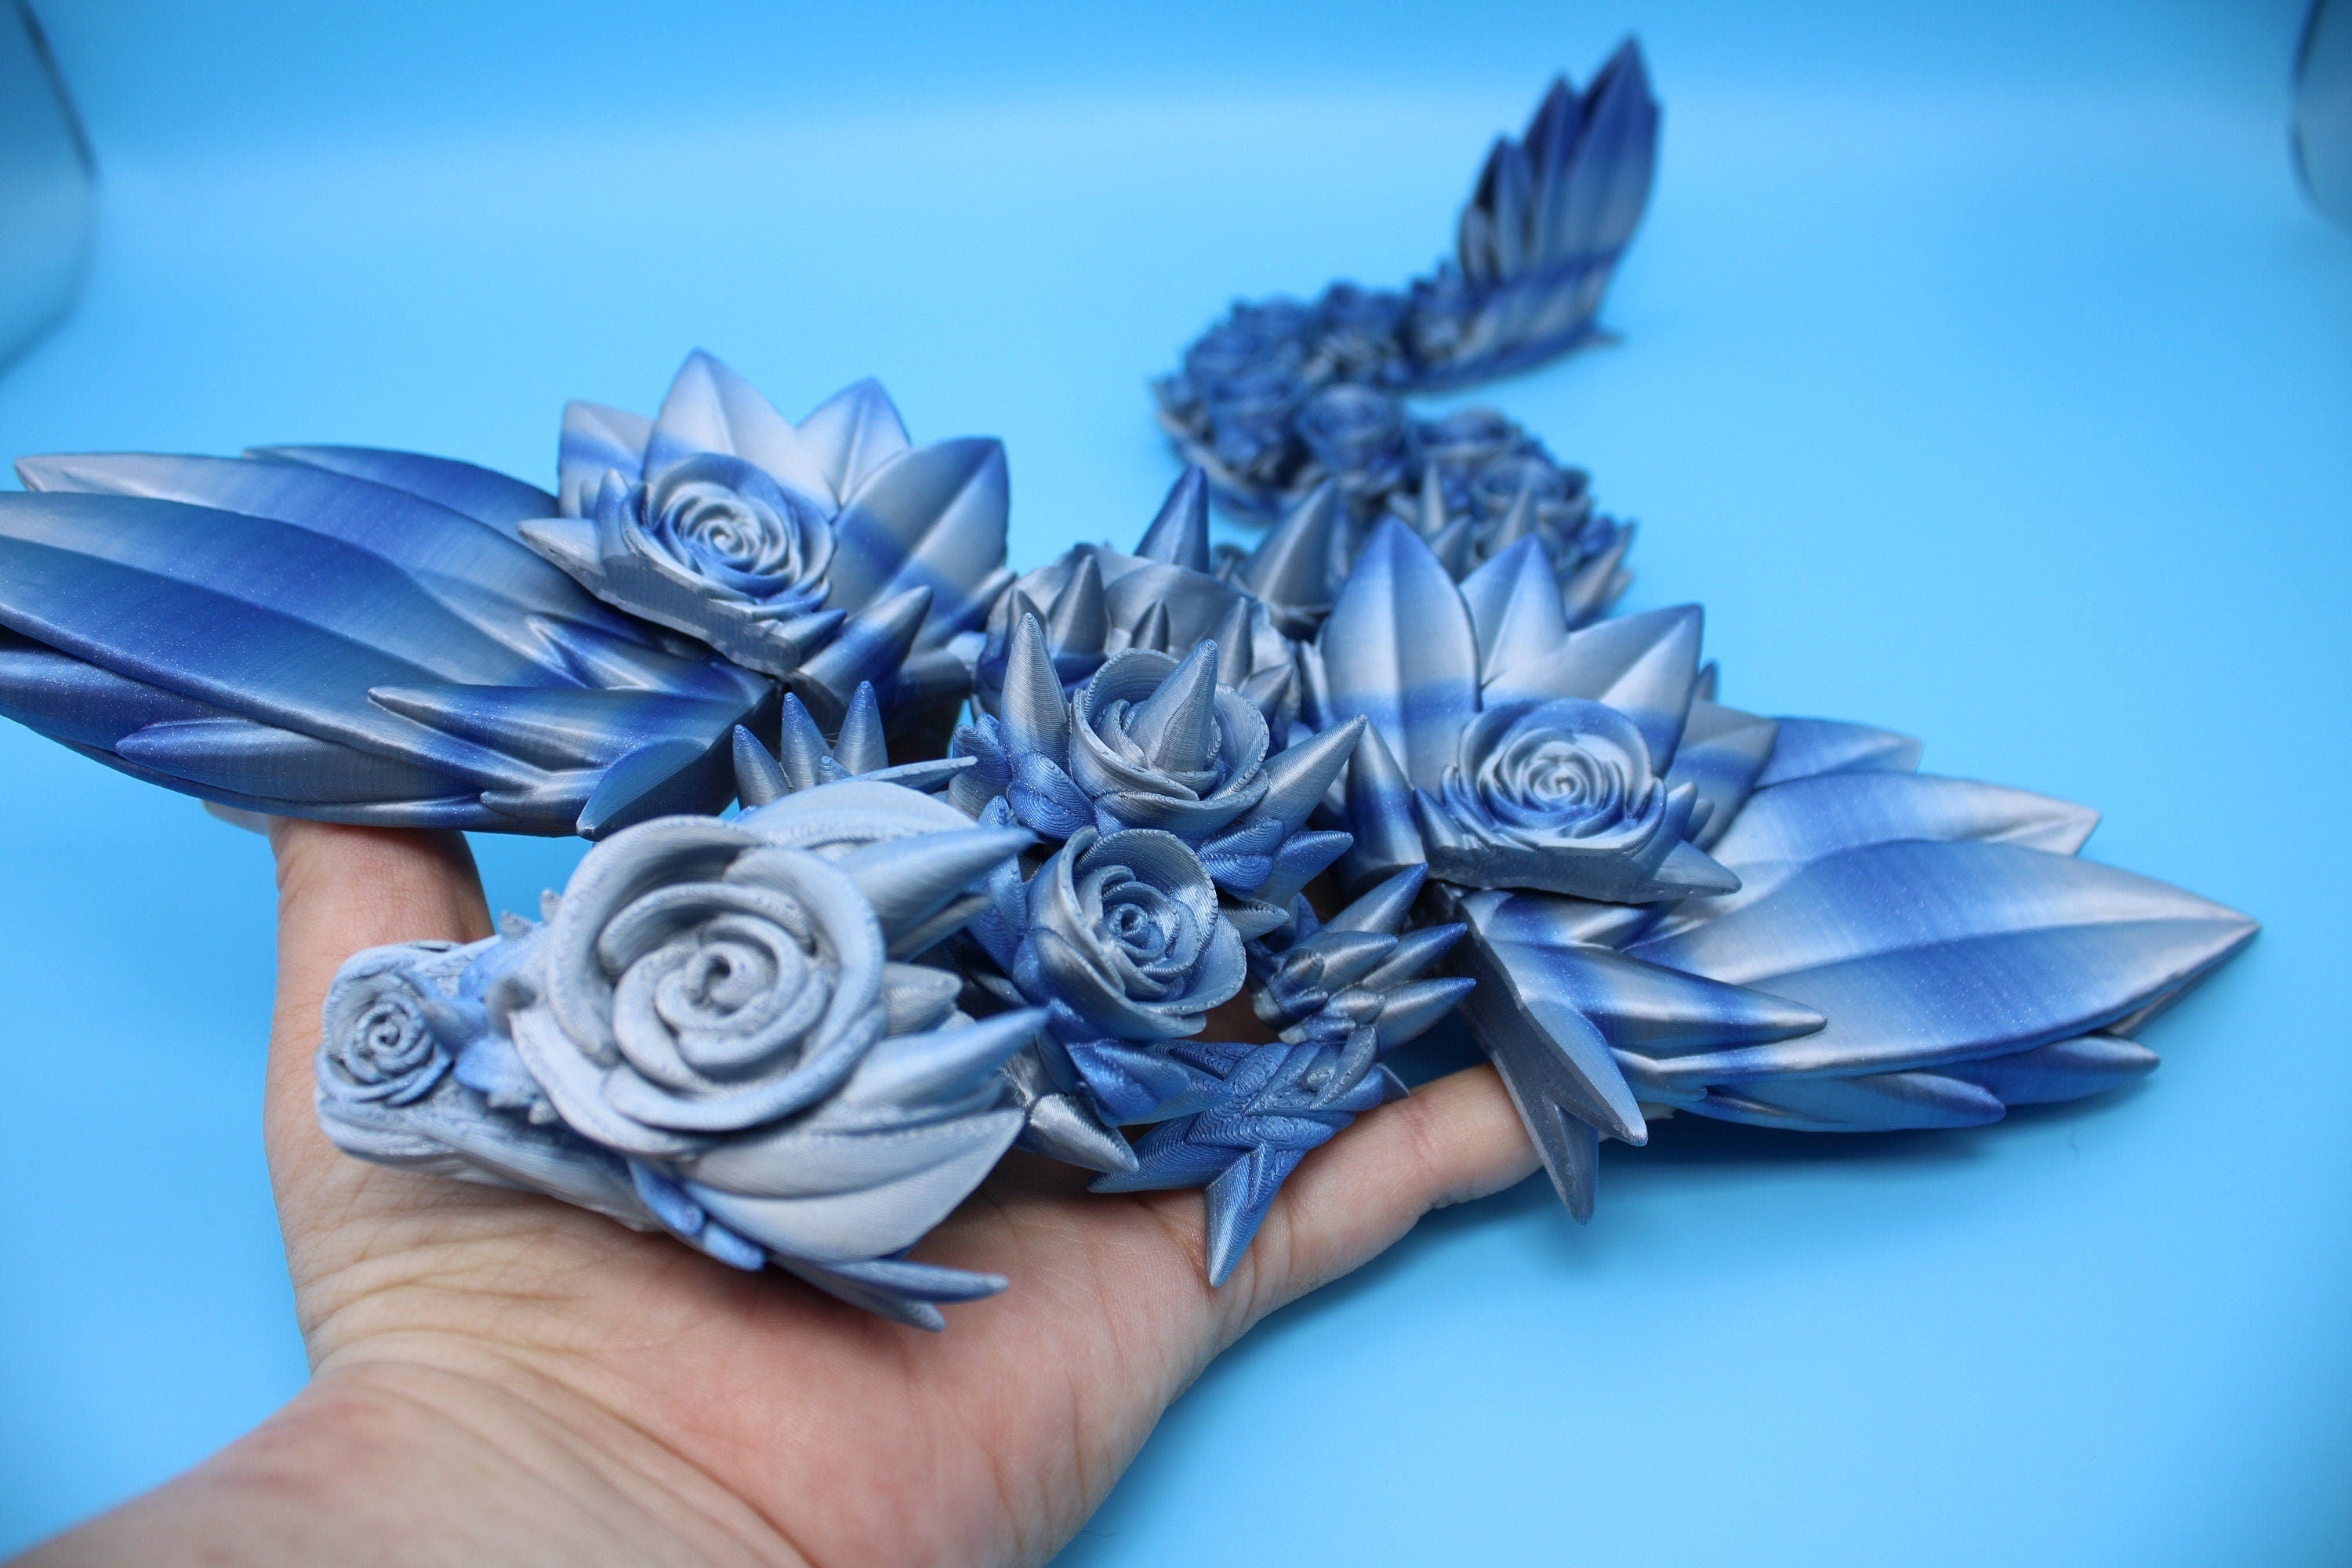 Blue / Silver Rose Wing Articulating Dragon | 3D Printed Fidget | Flexi Toy | Adult Fidget Toy | Sensory Desk Toy | 19 in. | Valentines Day